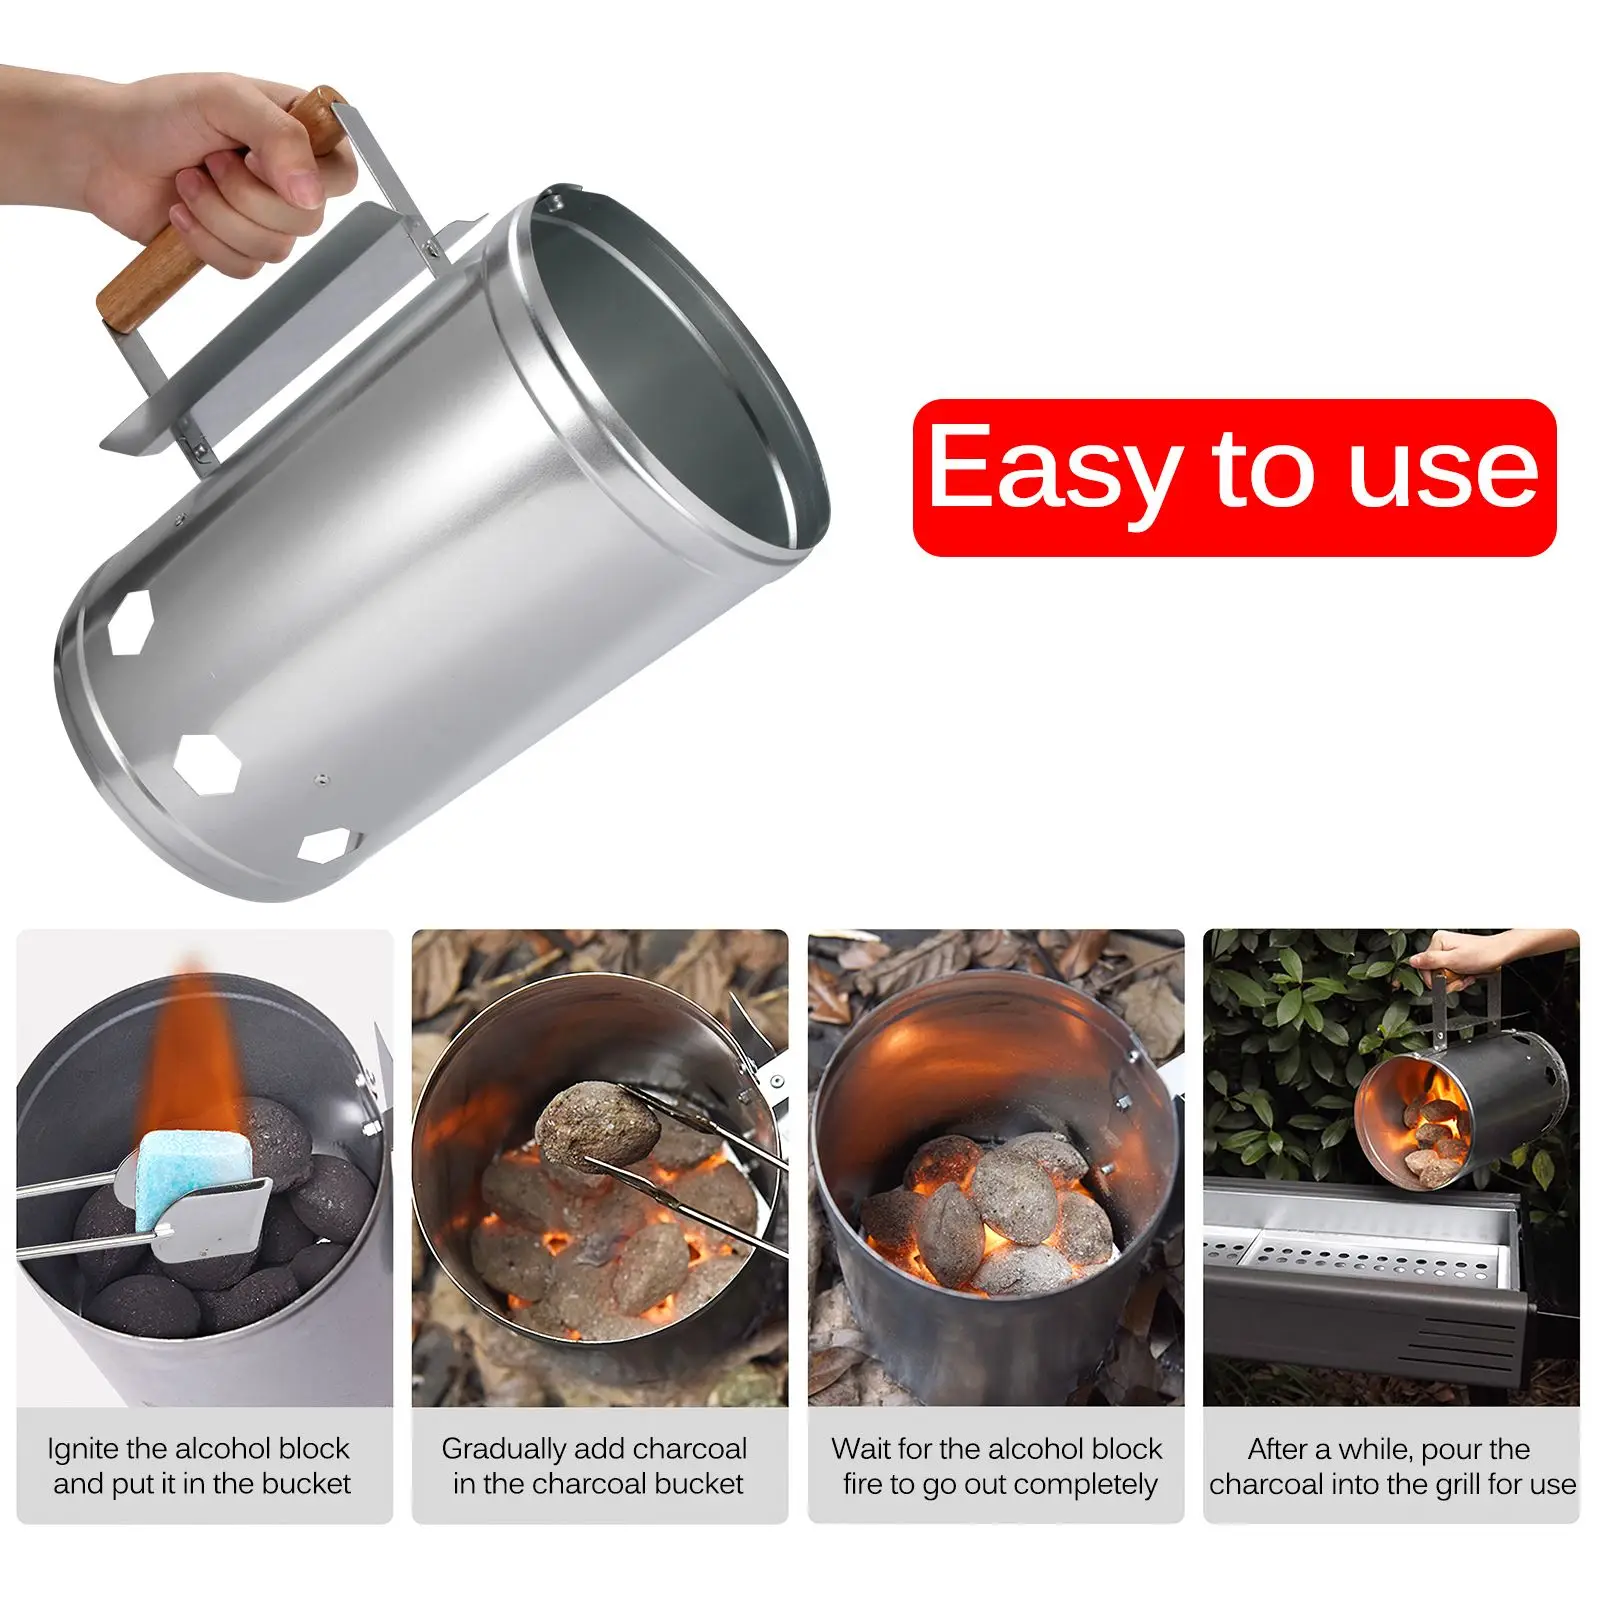 EE_ METAL FAST CHARCOAL IGNITION BARREL STOVE BARBECUE FIRE STARTER BUCKET FADDI 